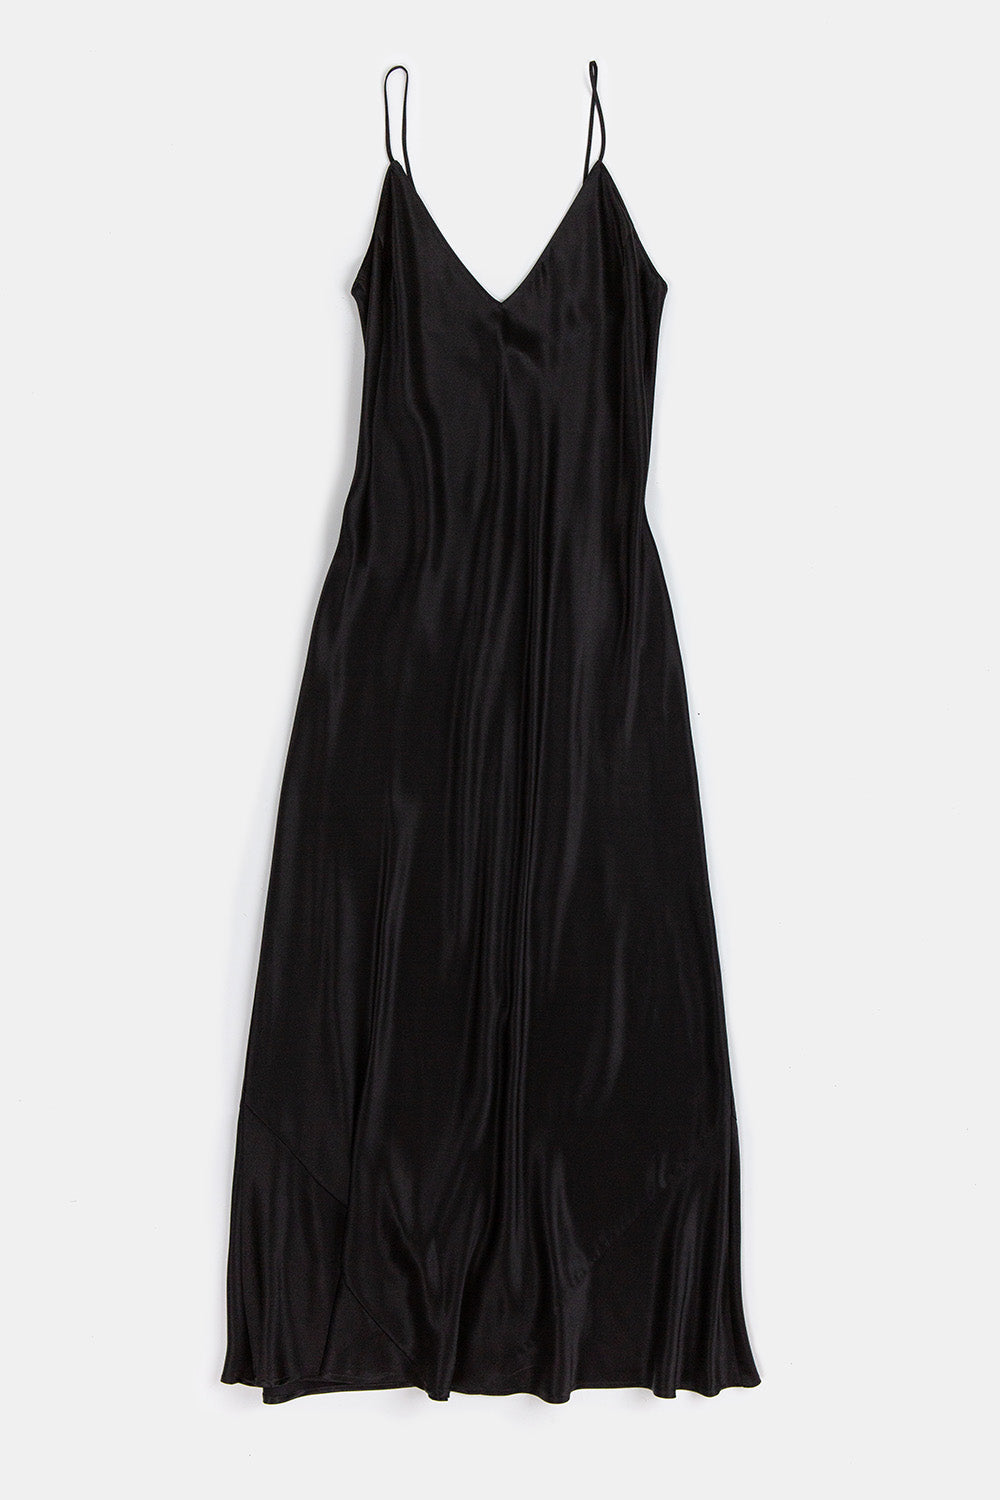 Tallulah Silk Charmeuse Gown in Black